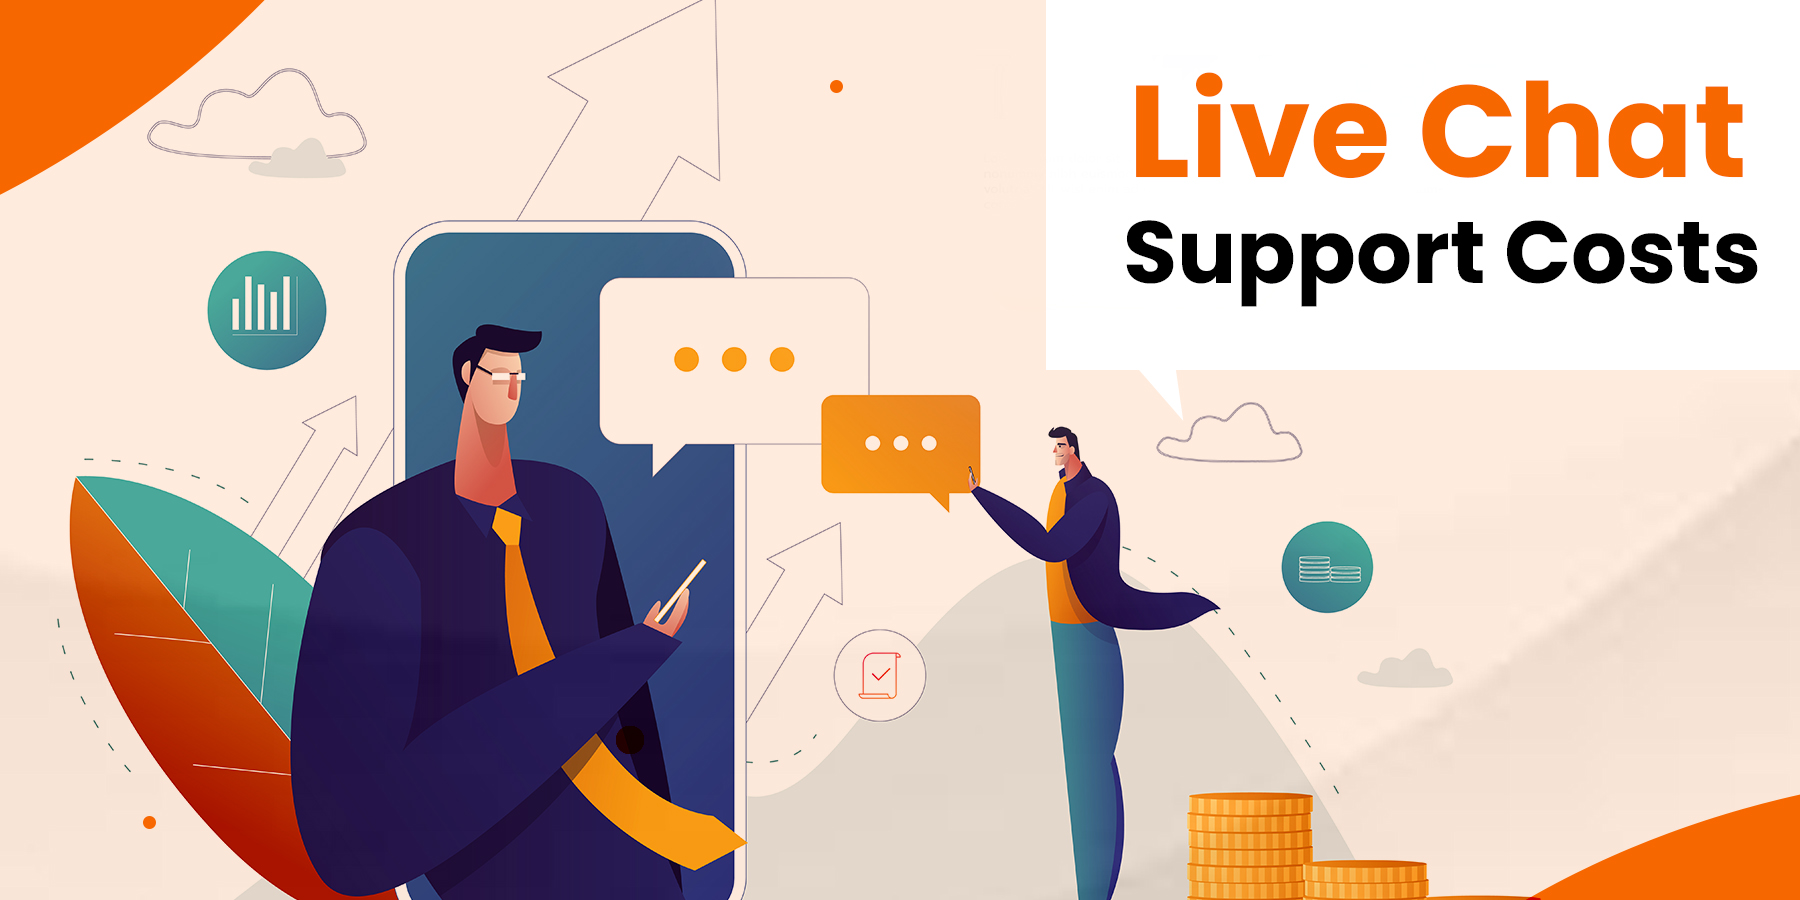 Live Chat Support Costs